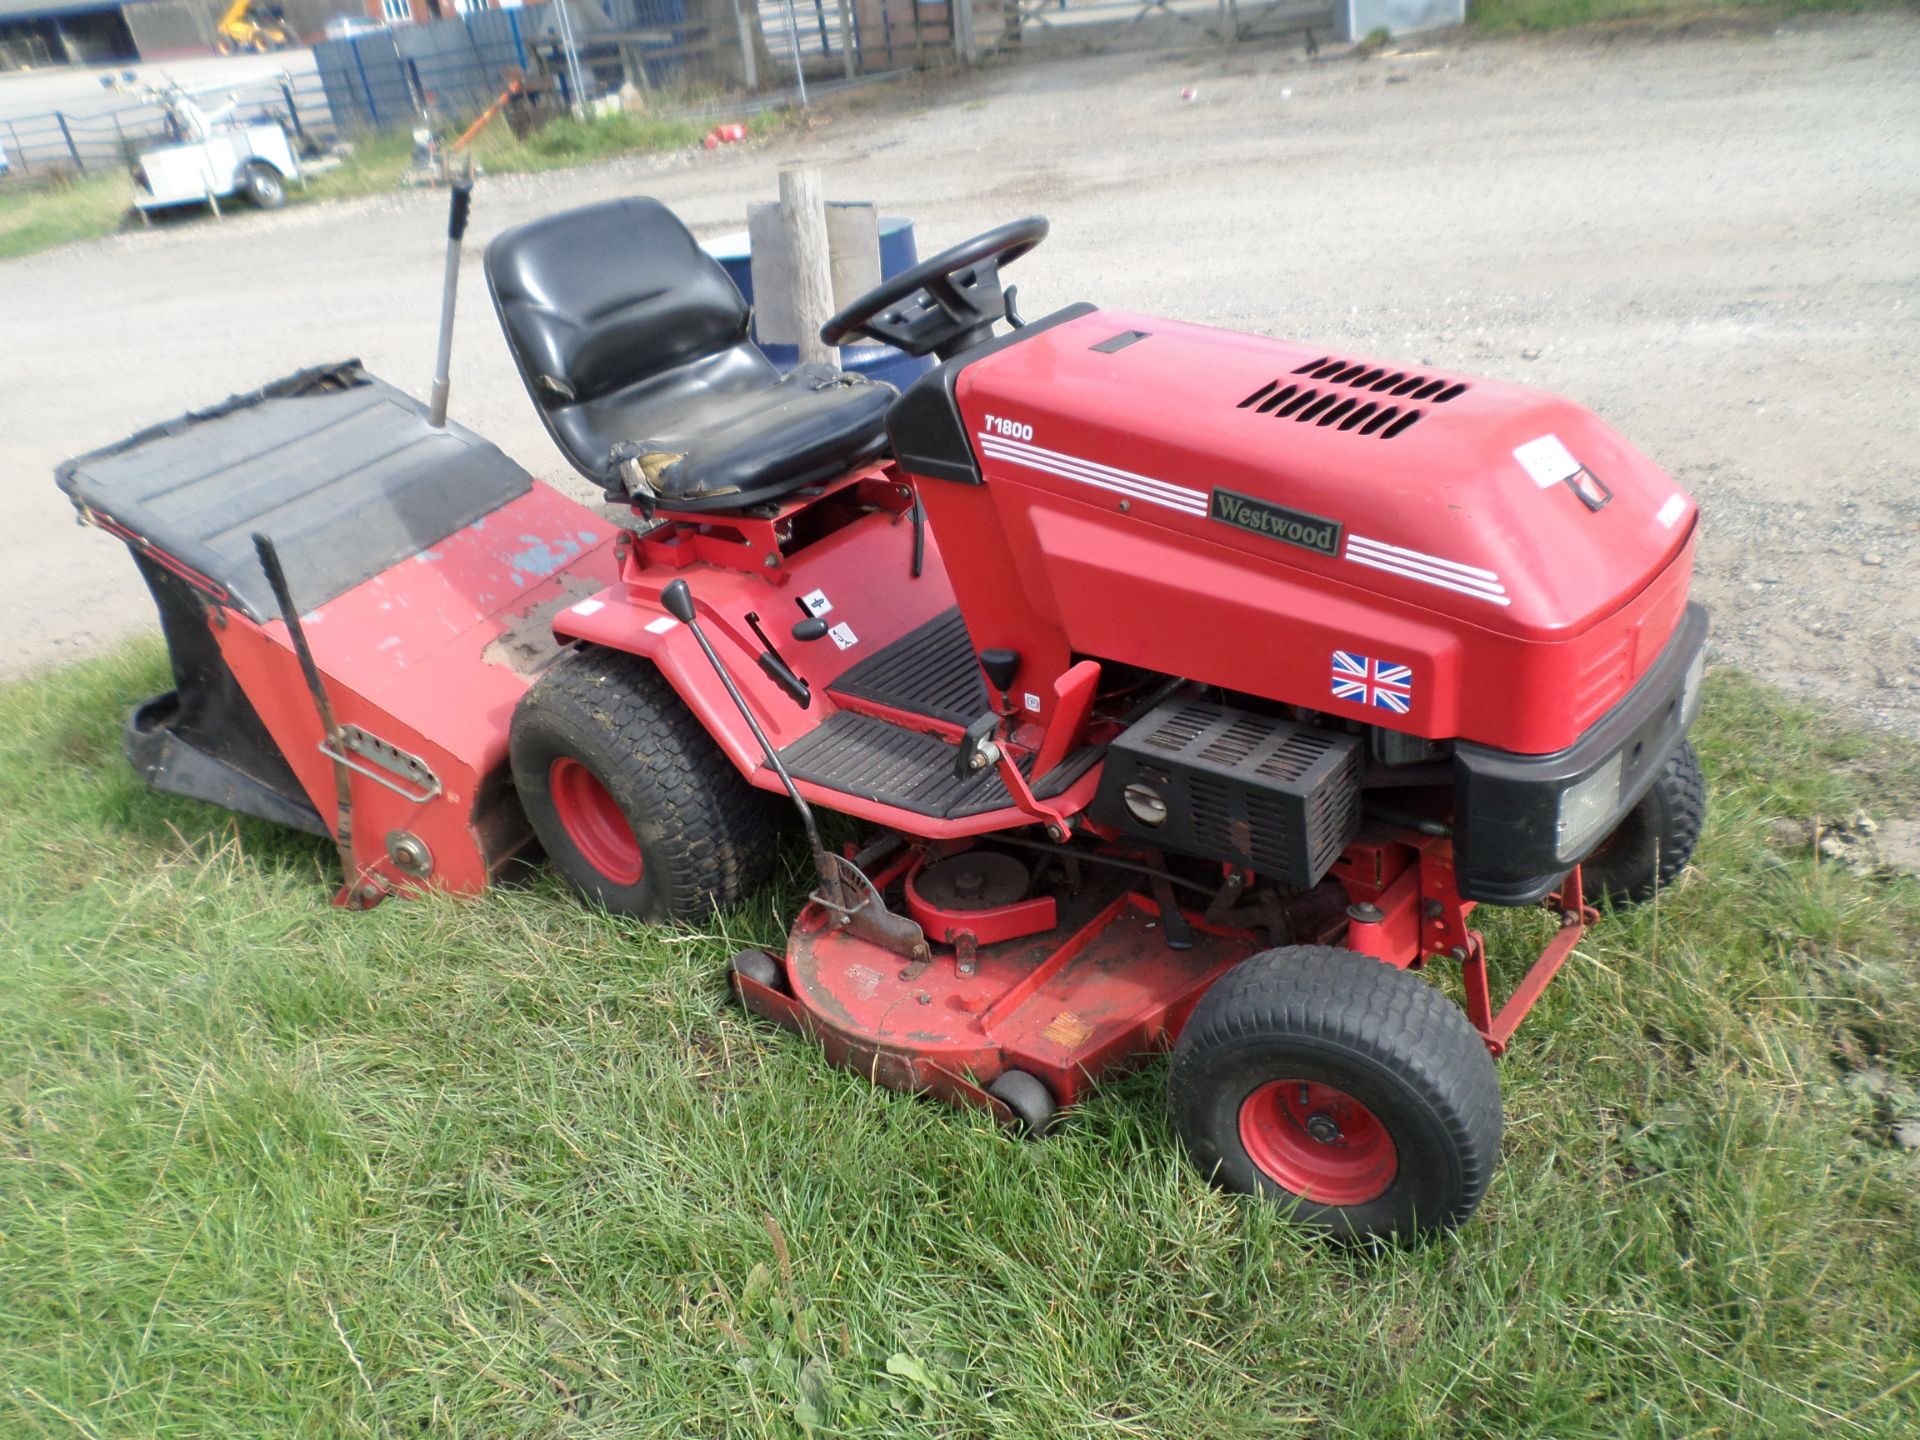 Westwood 1800 48" cut ride on mower with grass collector NO VAT